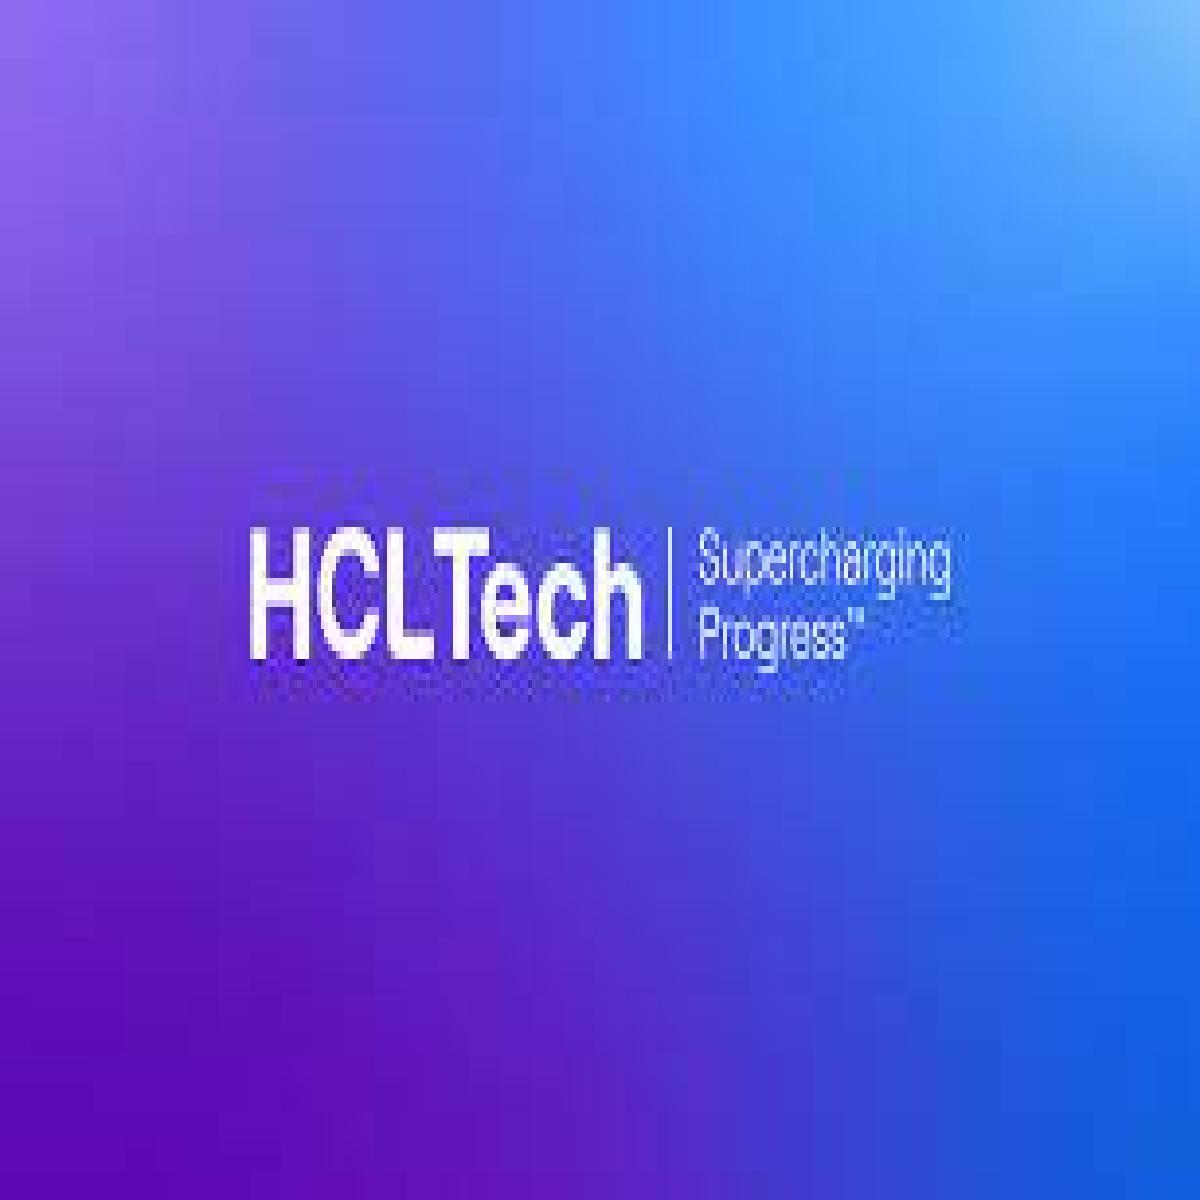 HCLTech launches New Brand Positioning of Supercharging Progress™